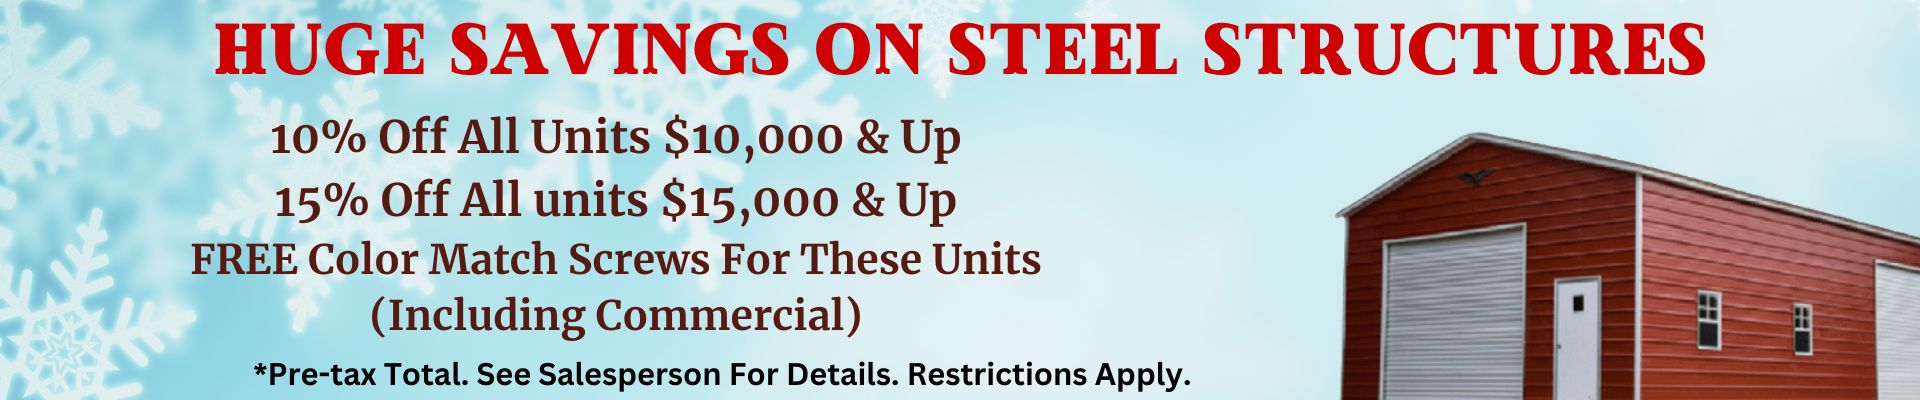 Steel Structure Offer Main